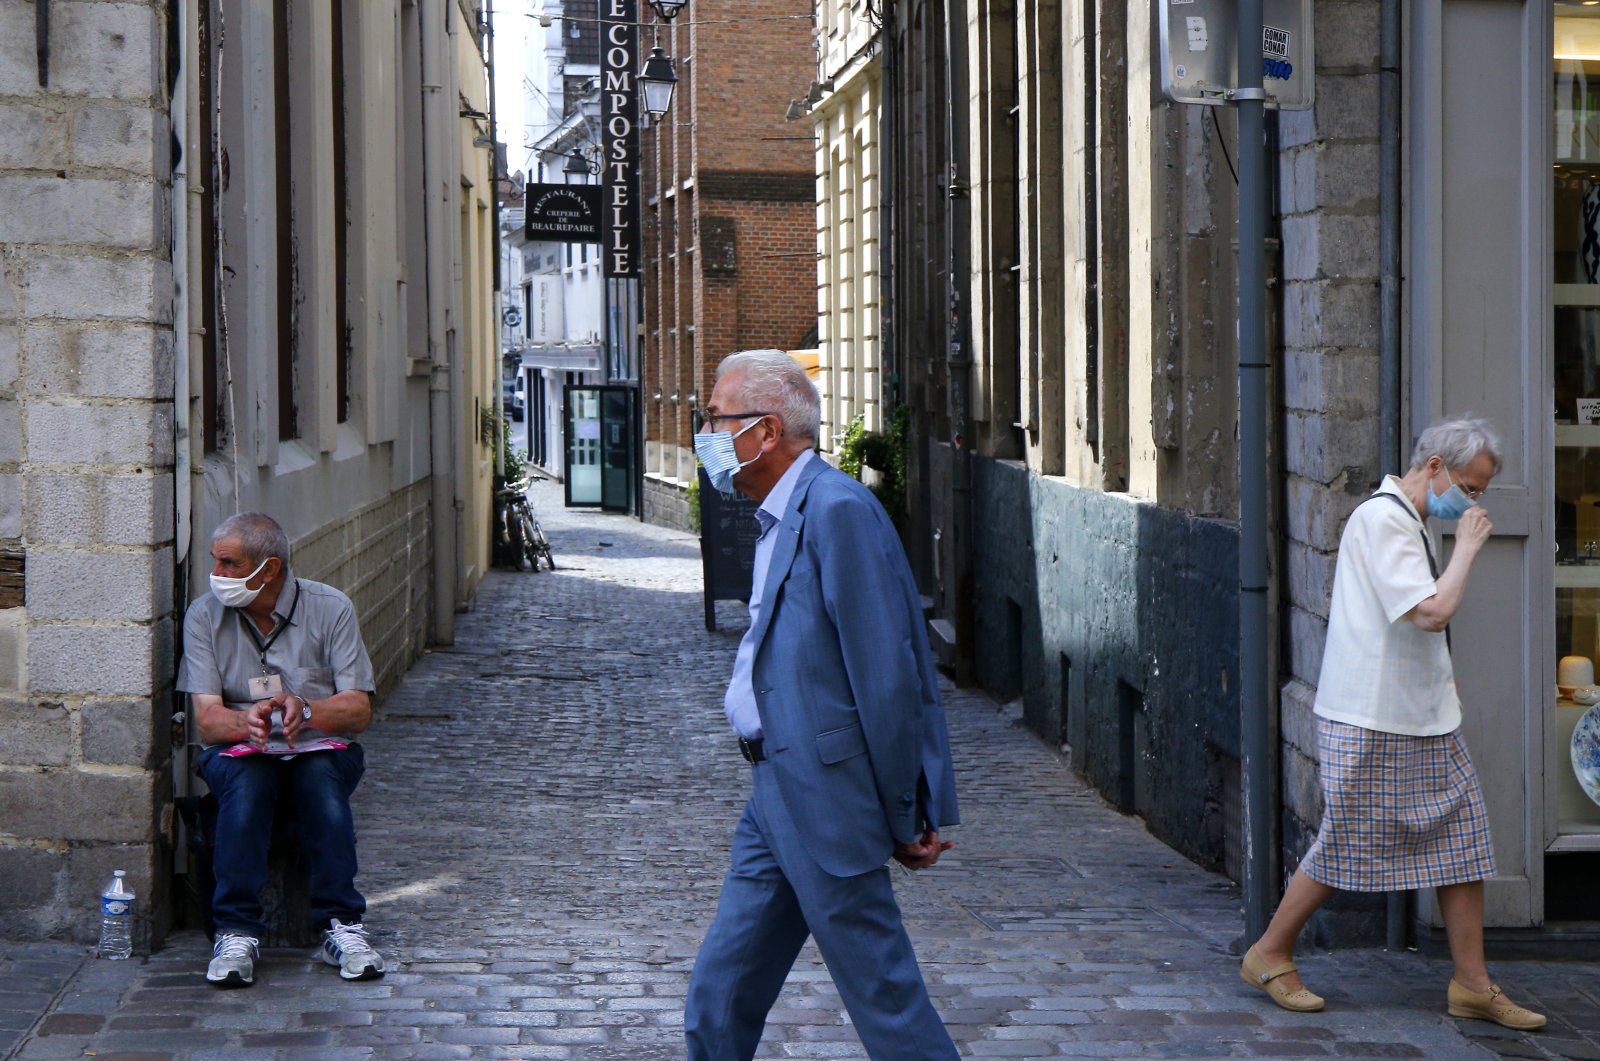 People wearing protective face masks as a precaution against the coronavirus are seen in a street of Lille, northern France, Aug. 21, 2020. (AP Photo)